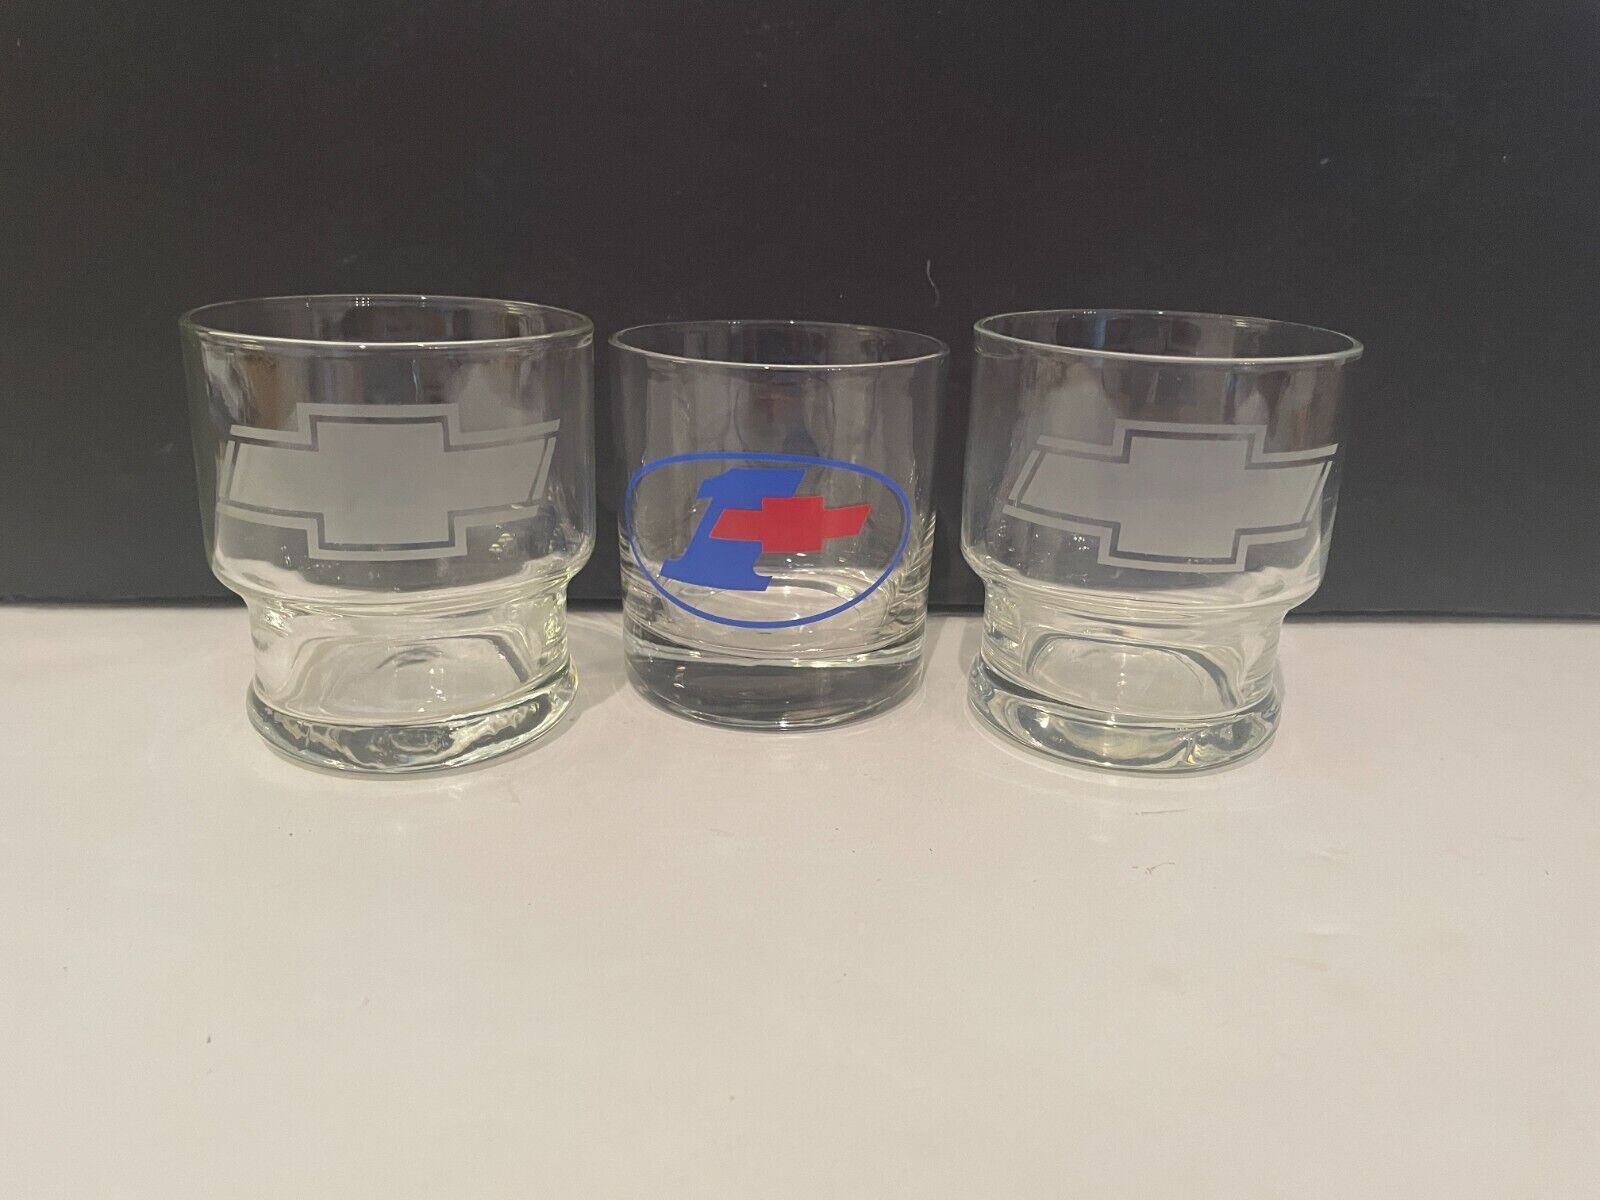 Three (3) Chevy / Chevrolet Rocks Glasses - Two Different Styles